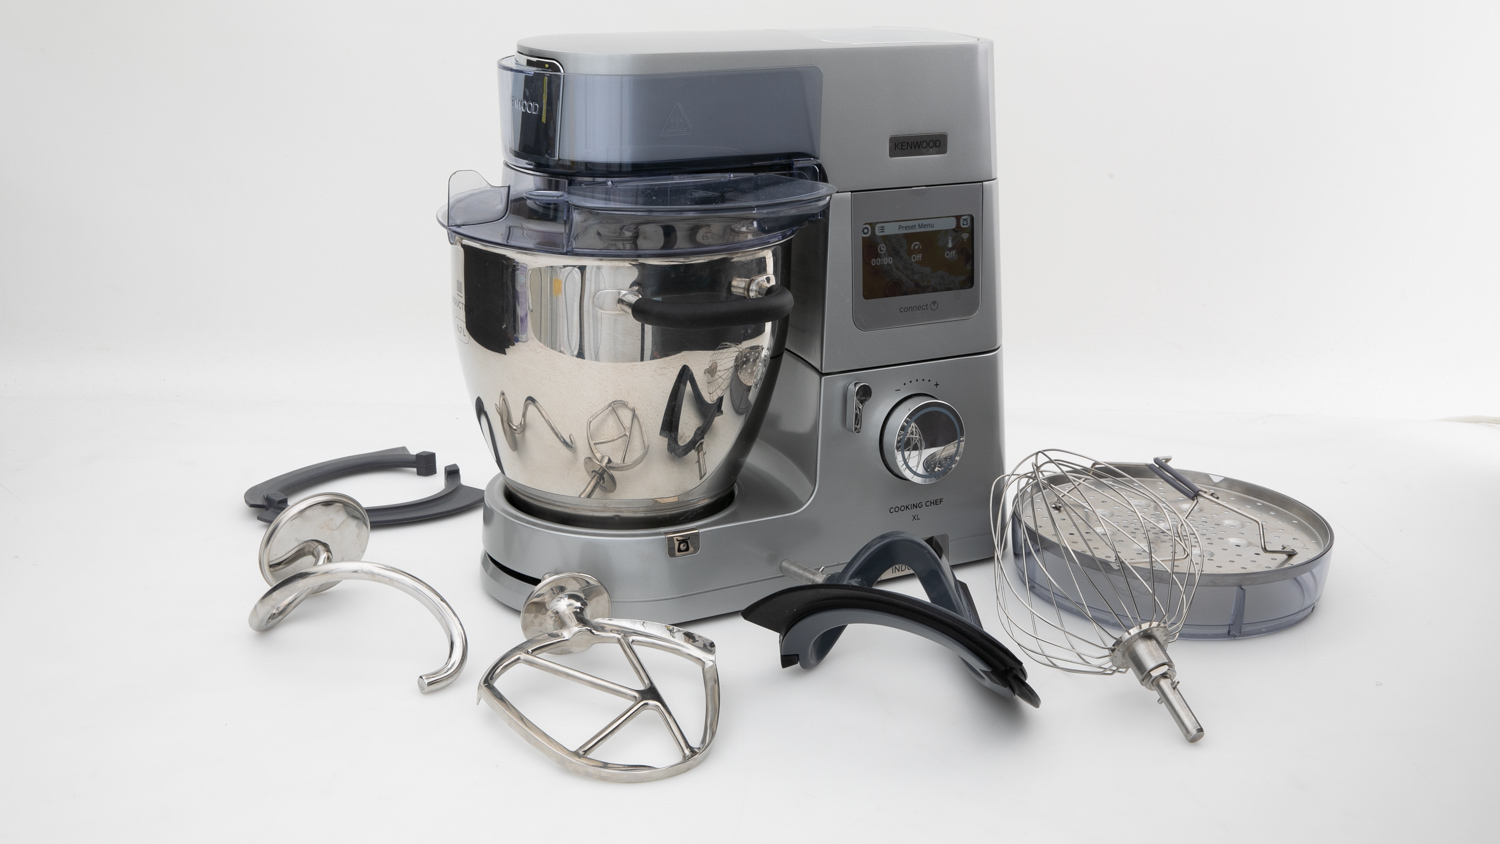 Kenwood Cooking Chef Xl Kcl95004si 1 